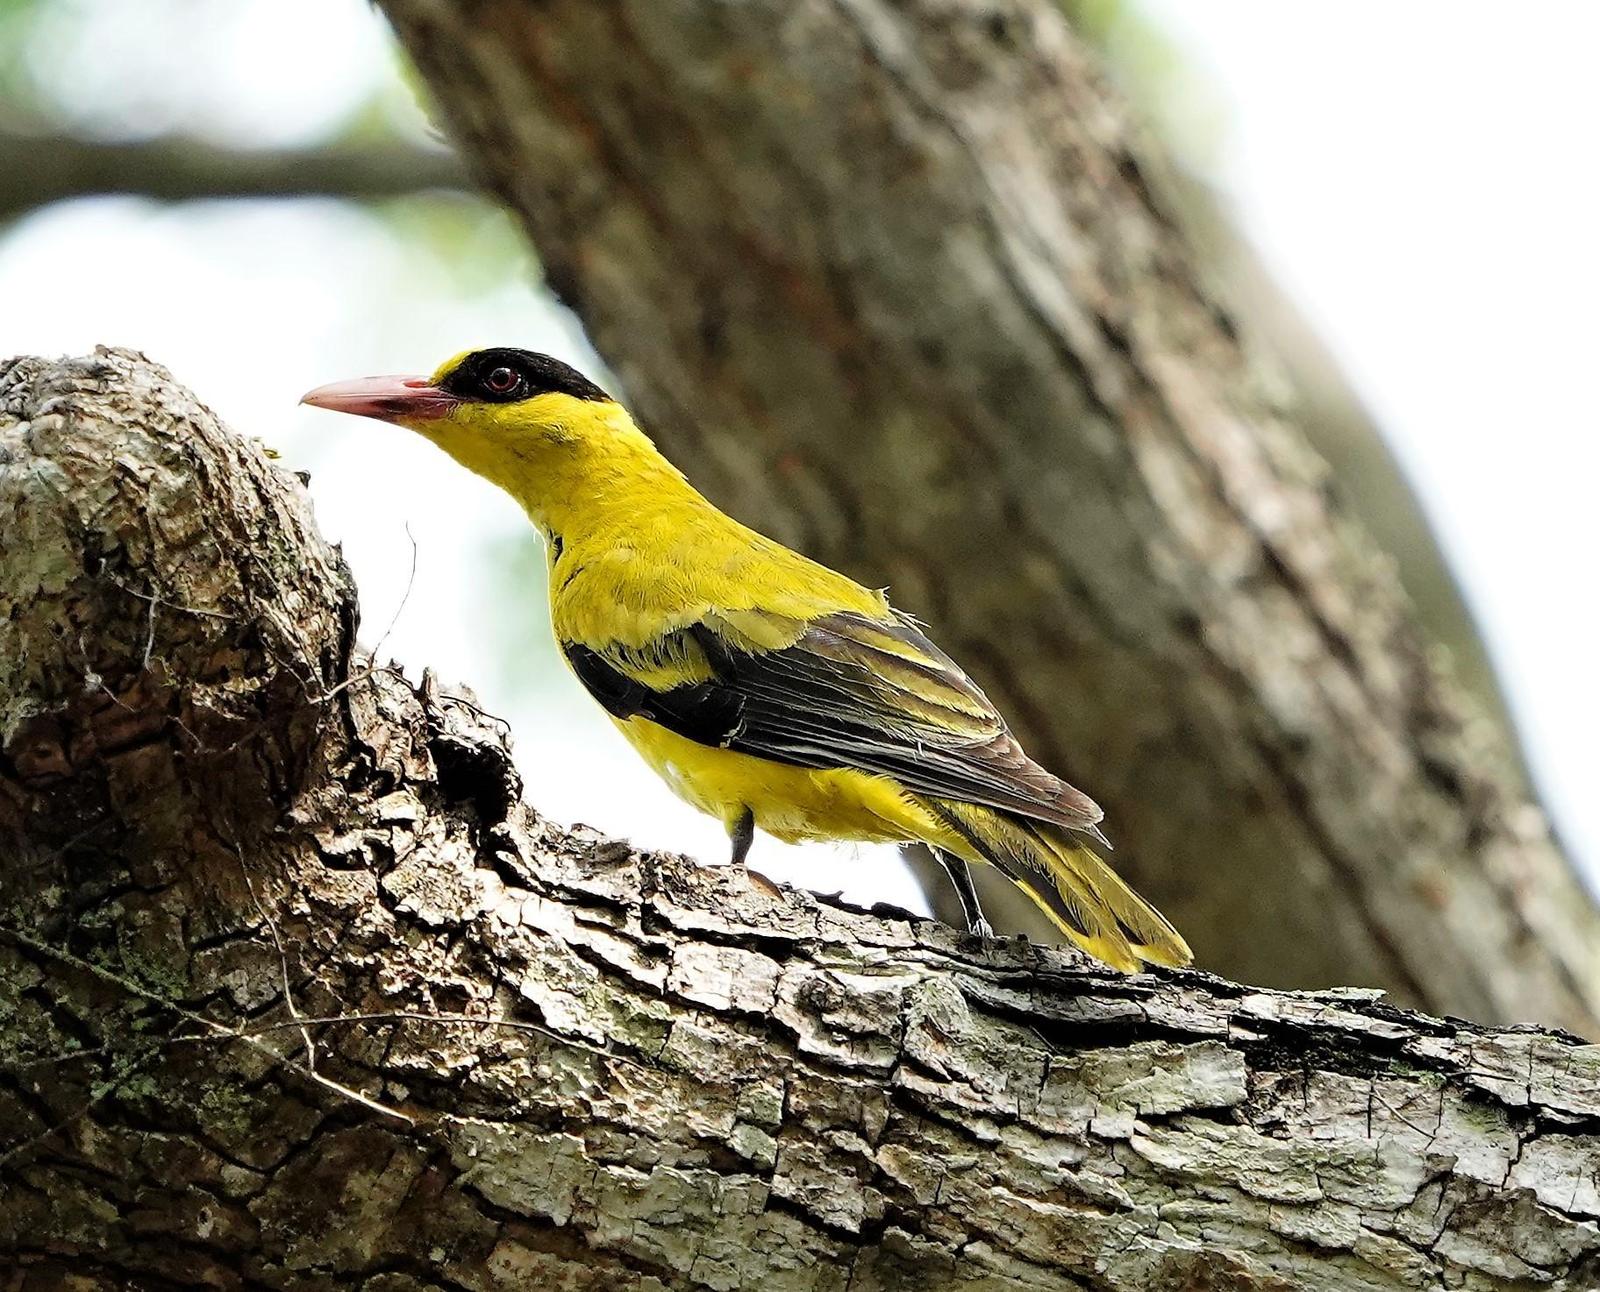 Black-naped Oriole Photo by Steven Cheong